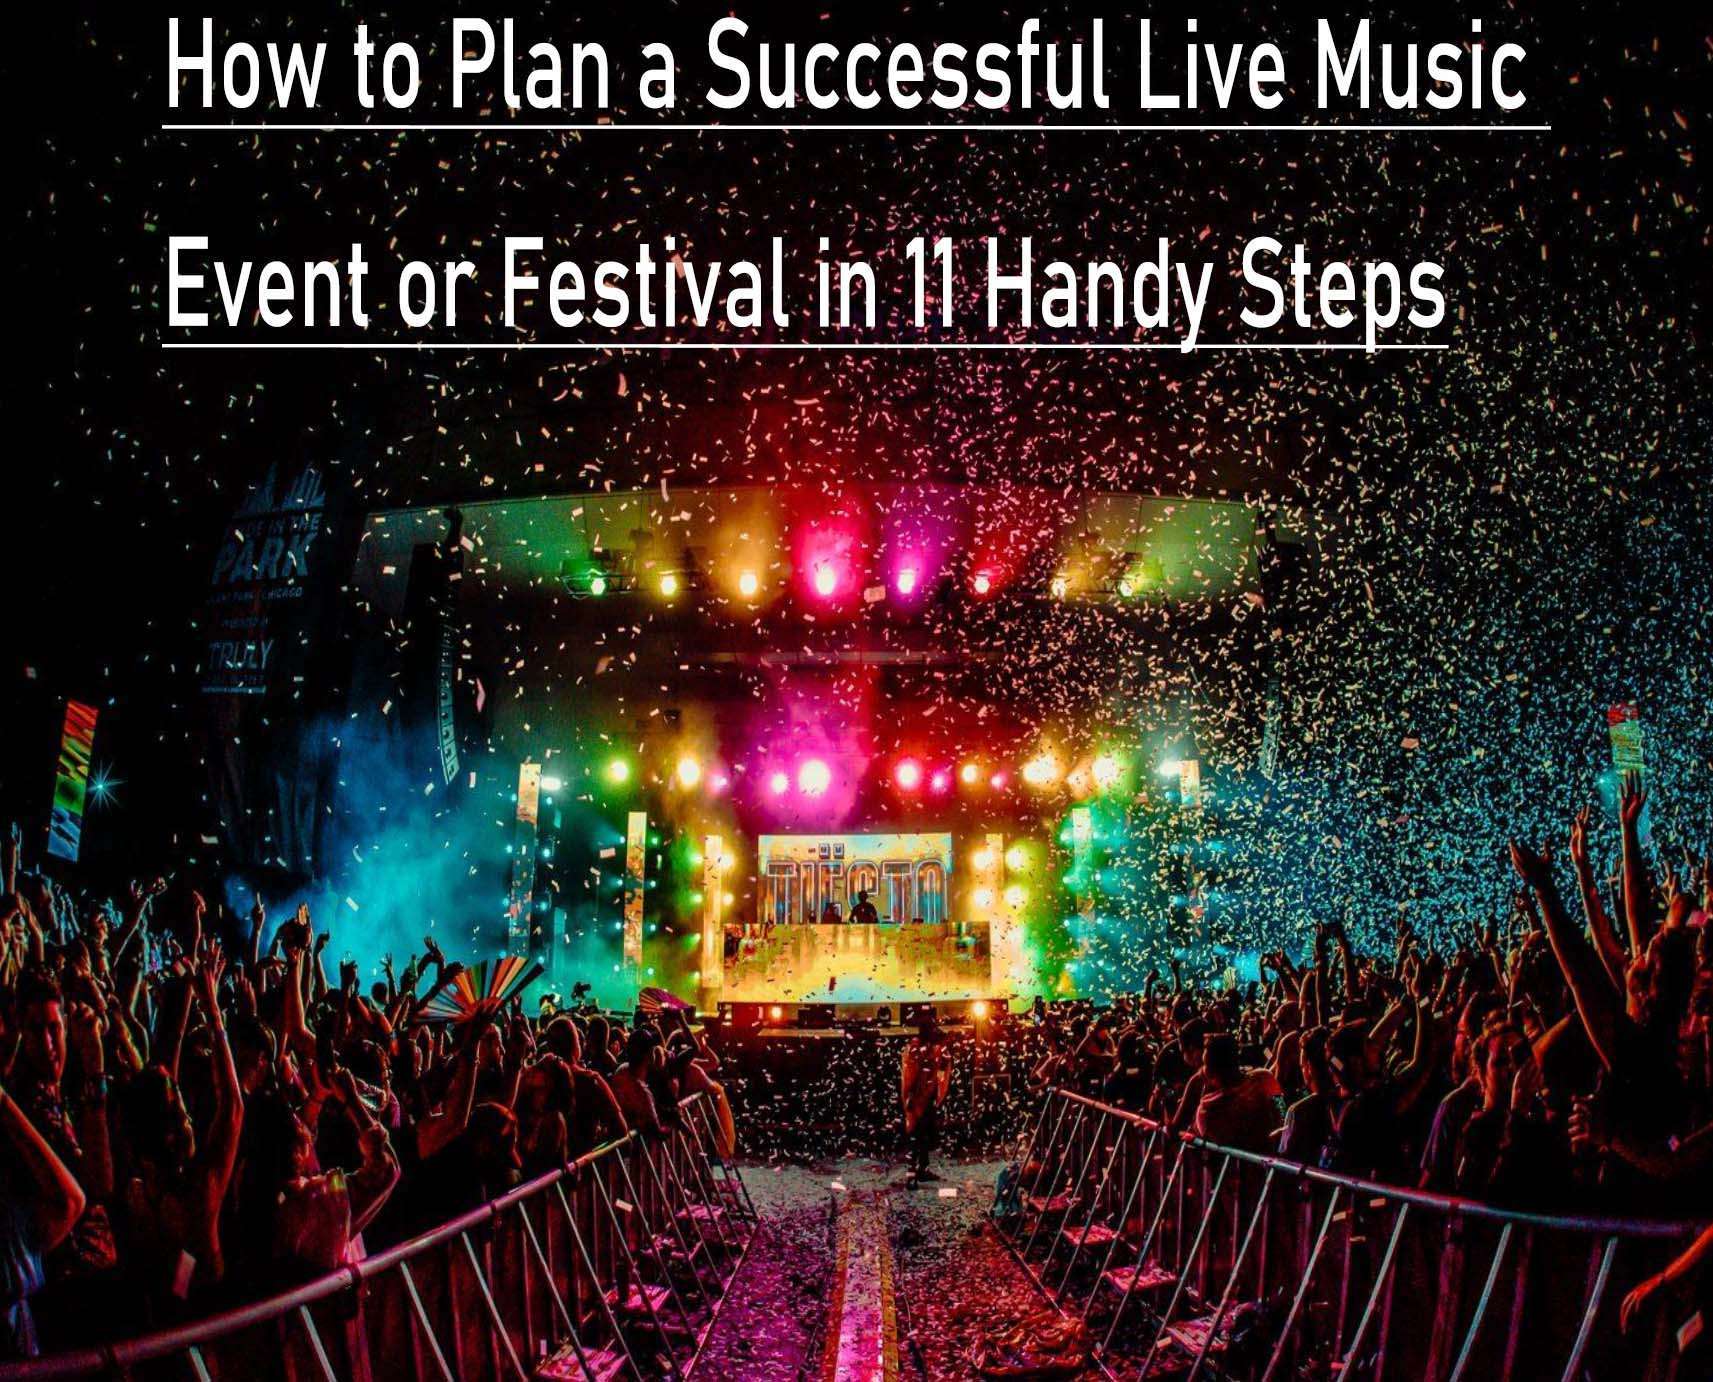 How to Plan a Successful Live Music Event or Festival in 11 Handy Steps